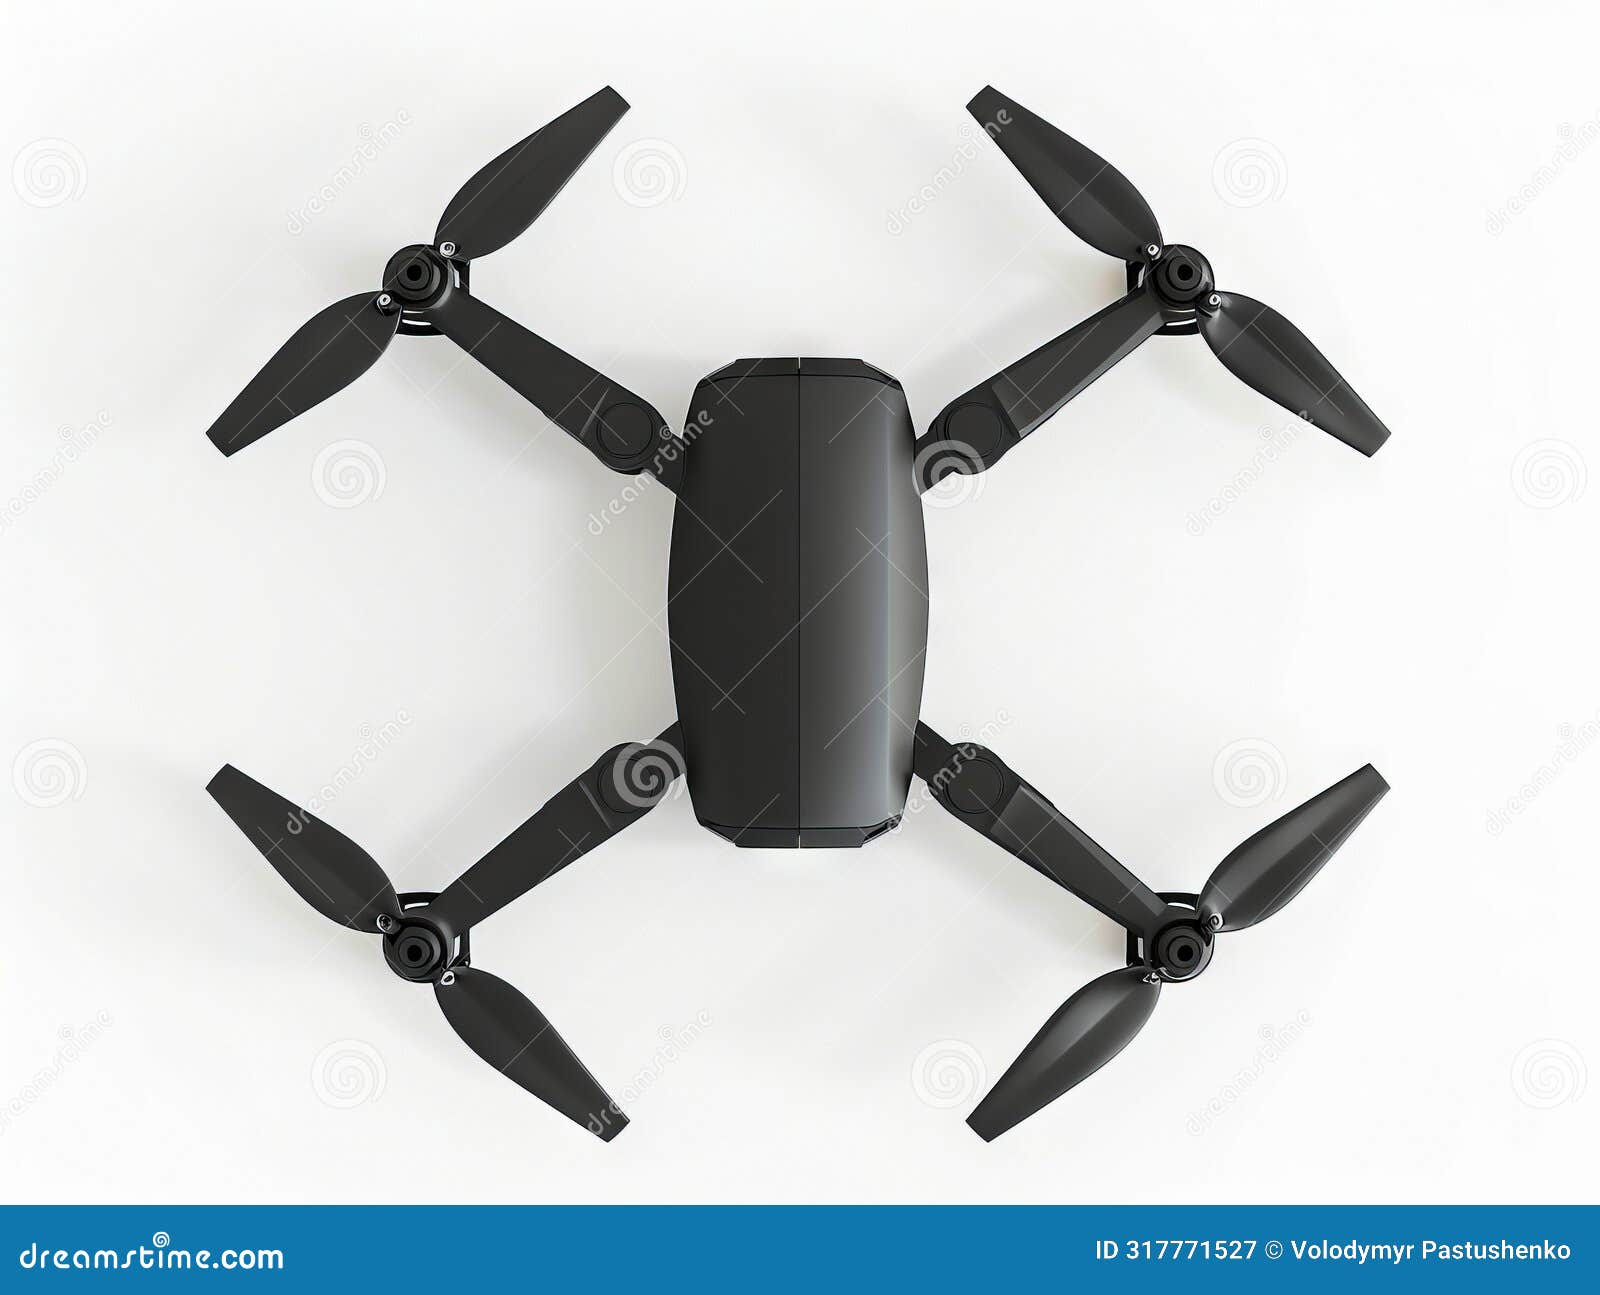 a black drone with four propellers on top